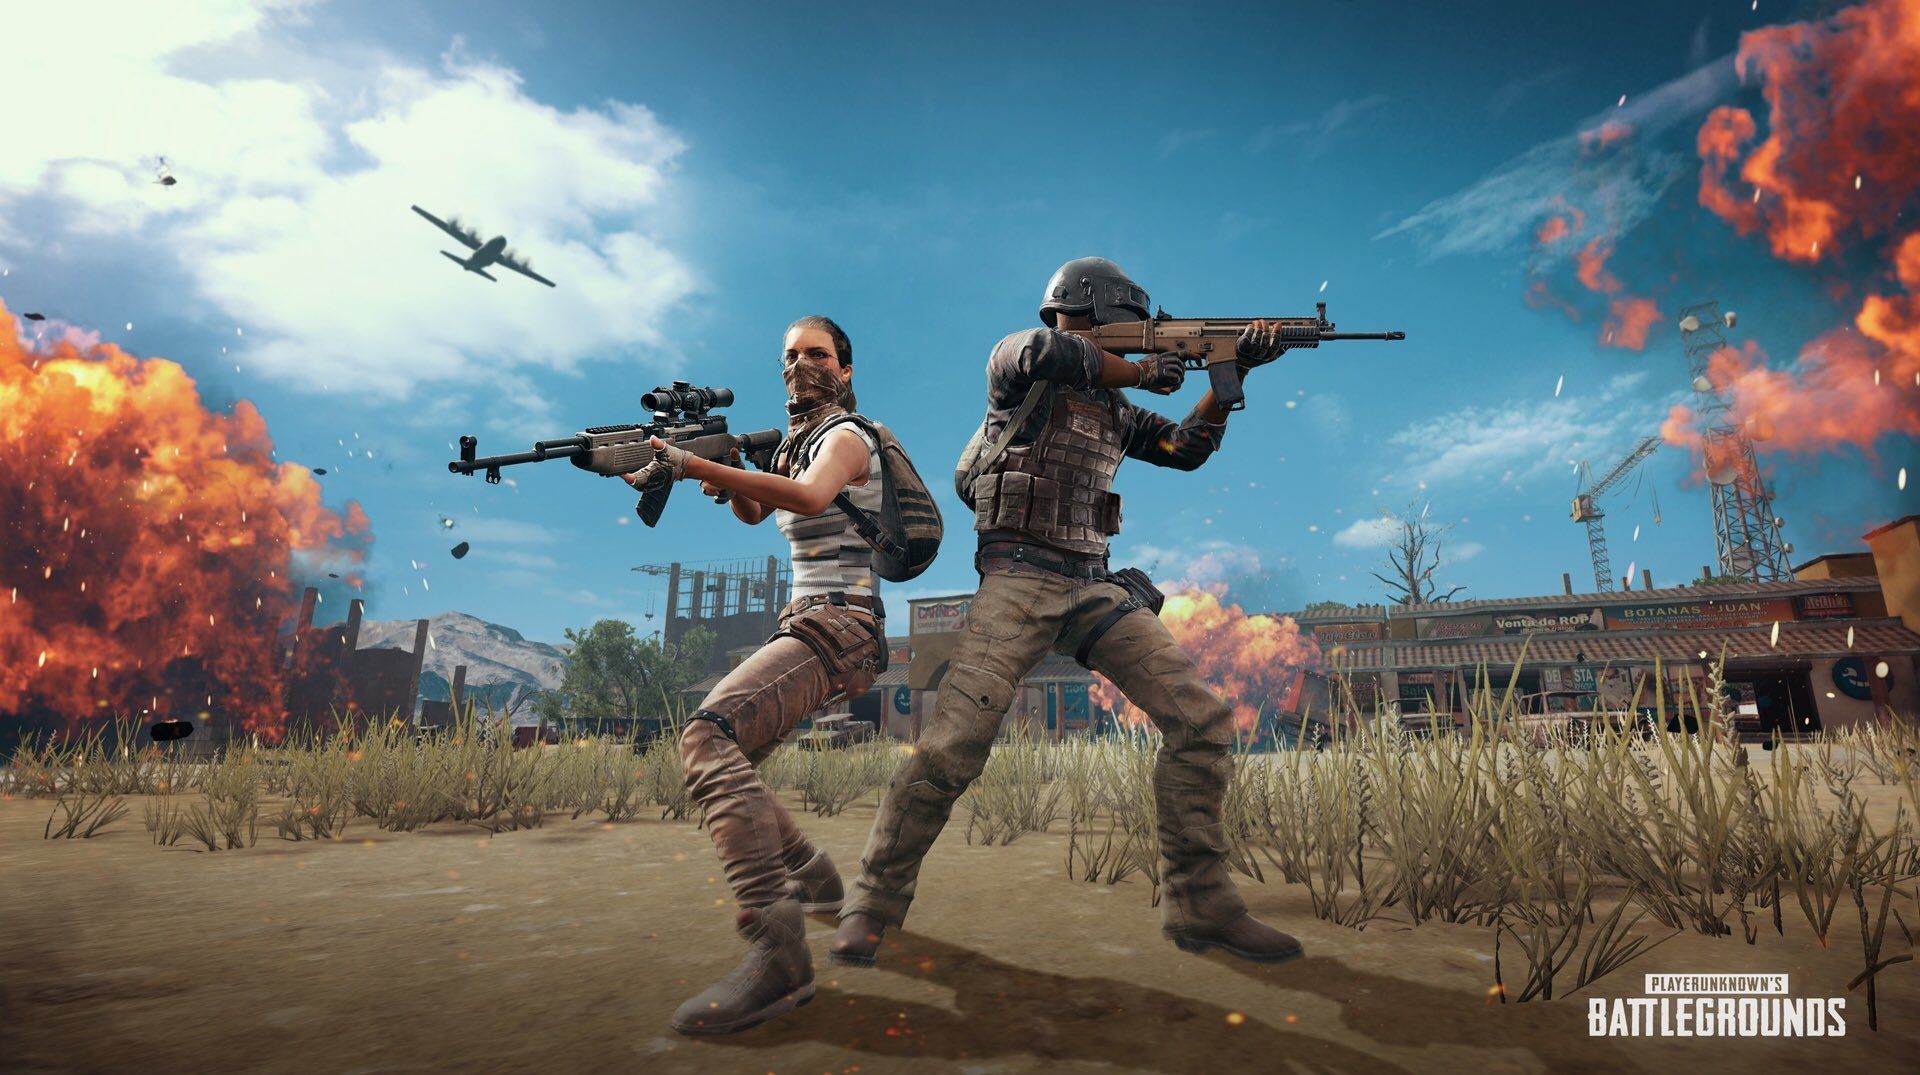 Minor kills brother for not letting him play PUBG game in Thane